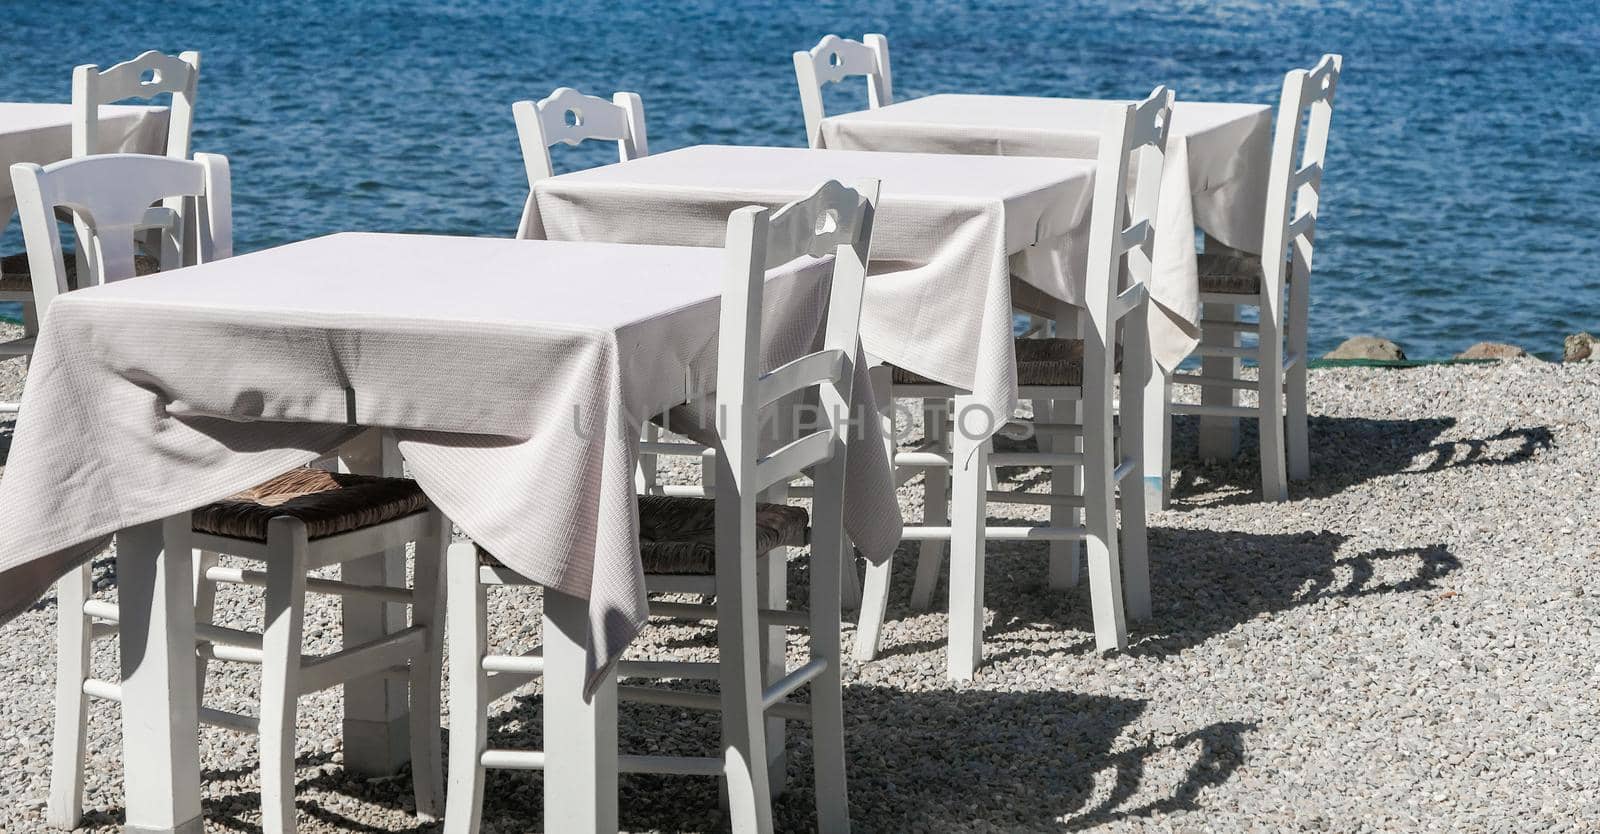 White restaurant tables on the beach in summer - travel, vacation and summer concept. The perfect lunch with a sea view